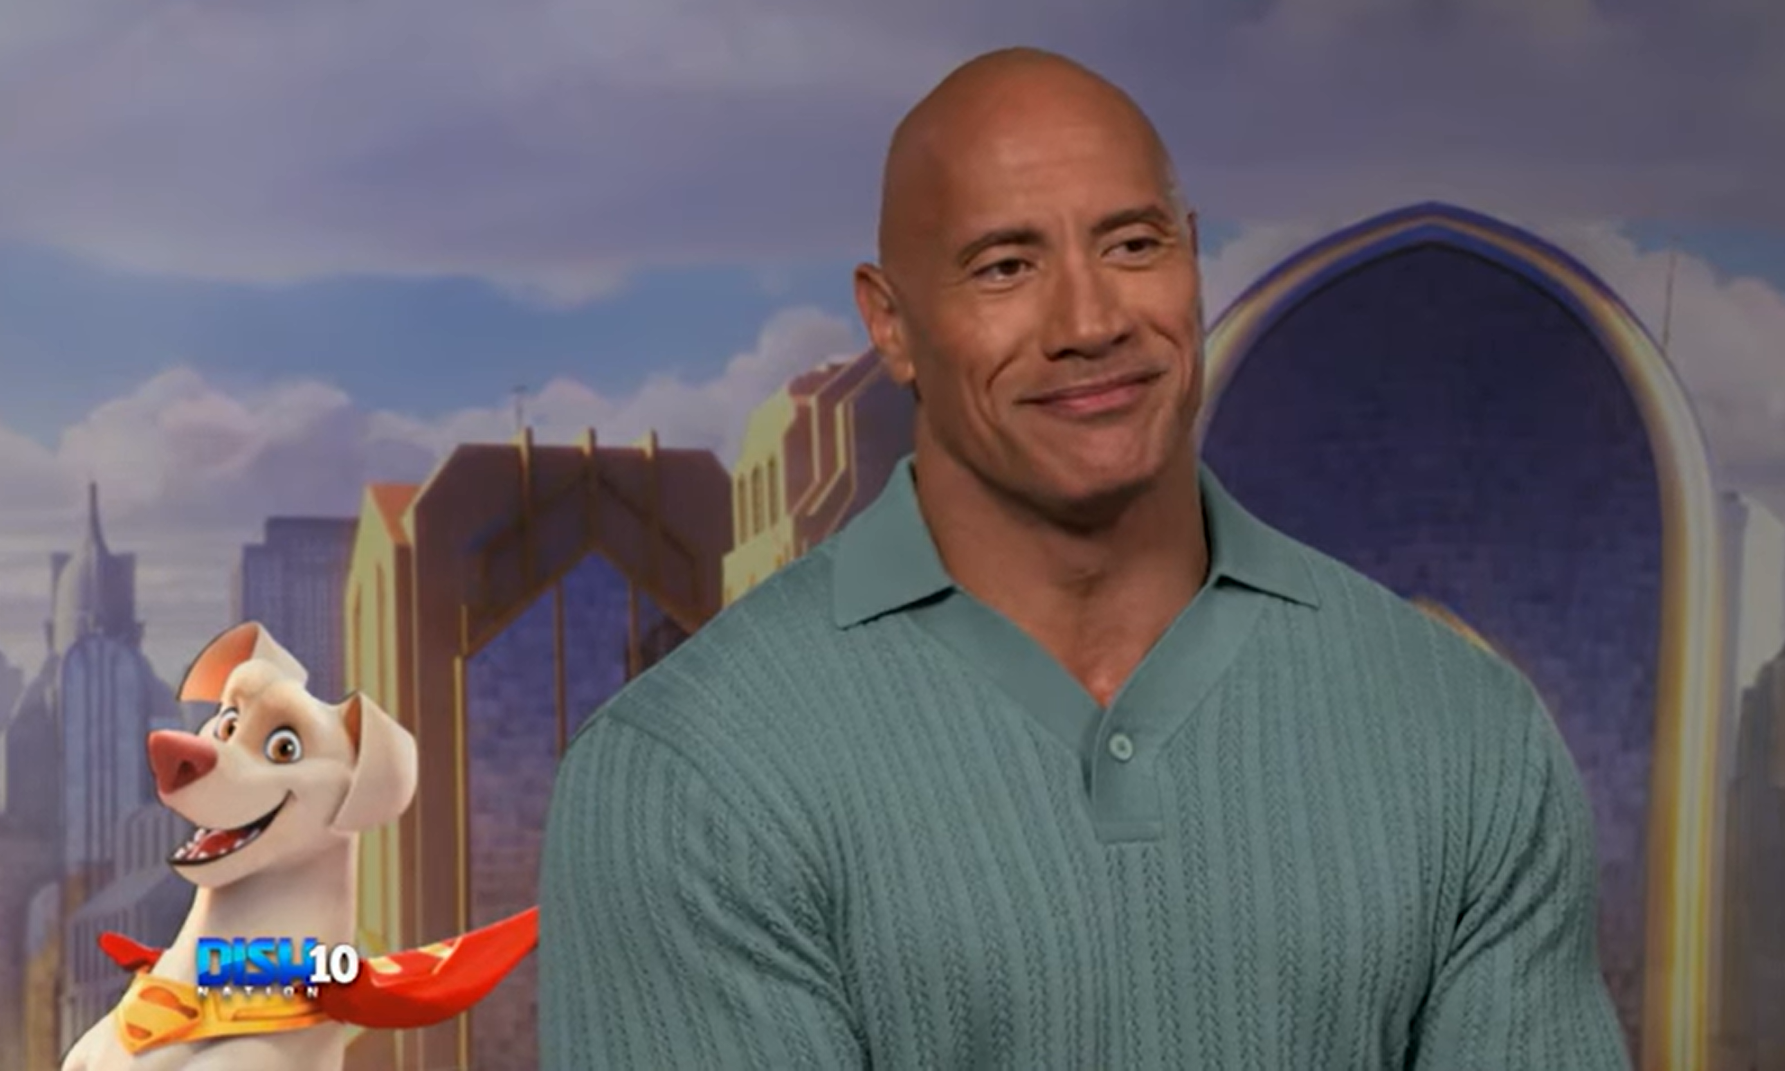 Dwayne Johnson says he wants to be Megan Thee Stallion's pet in interview for 'DC League of Super-Pets'